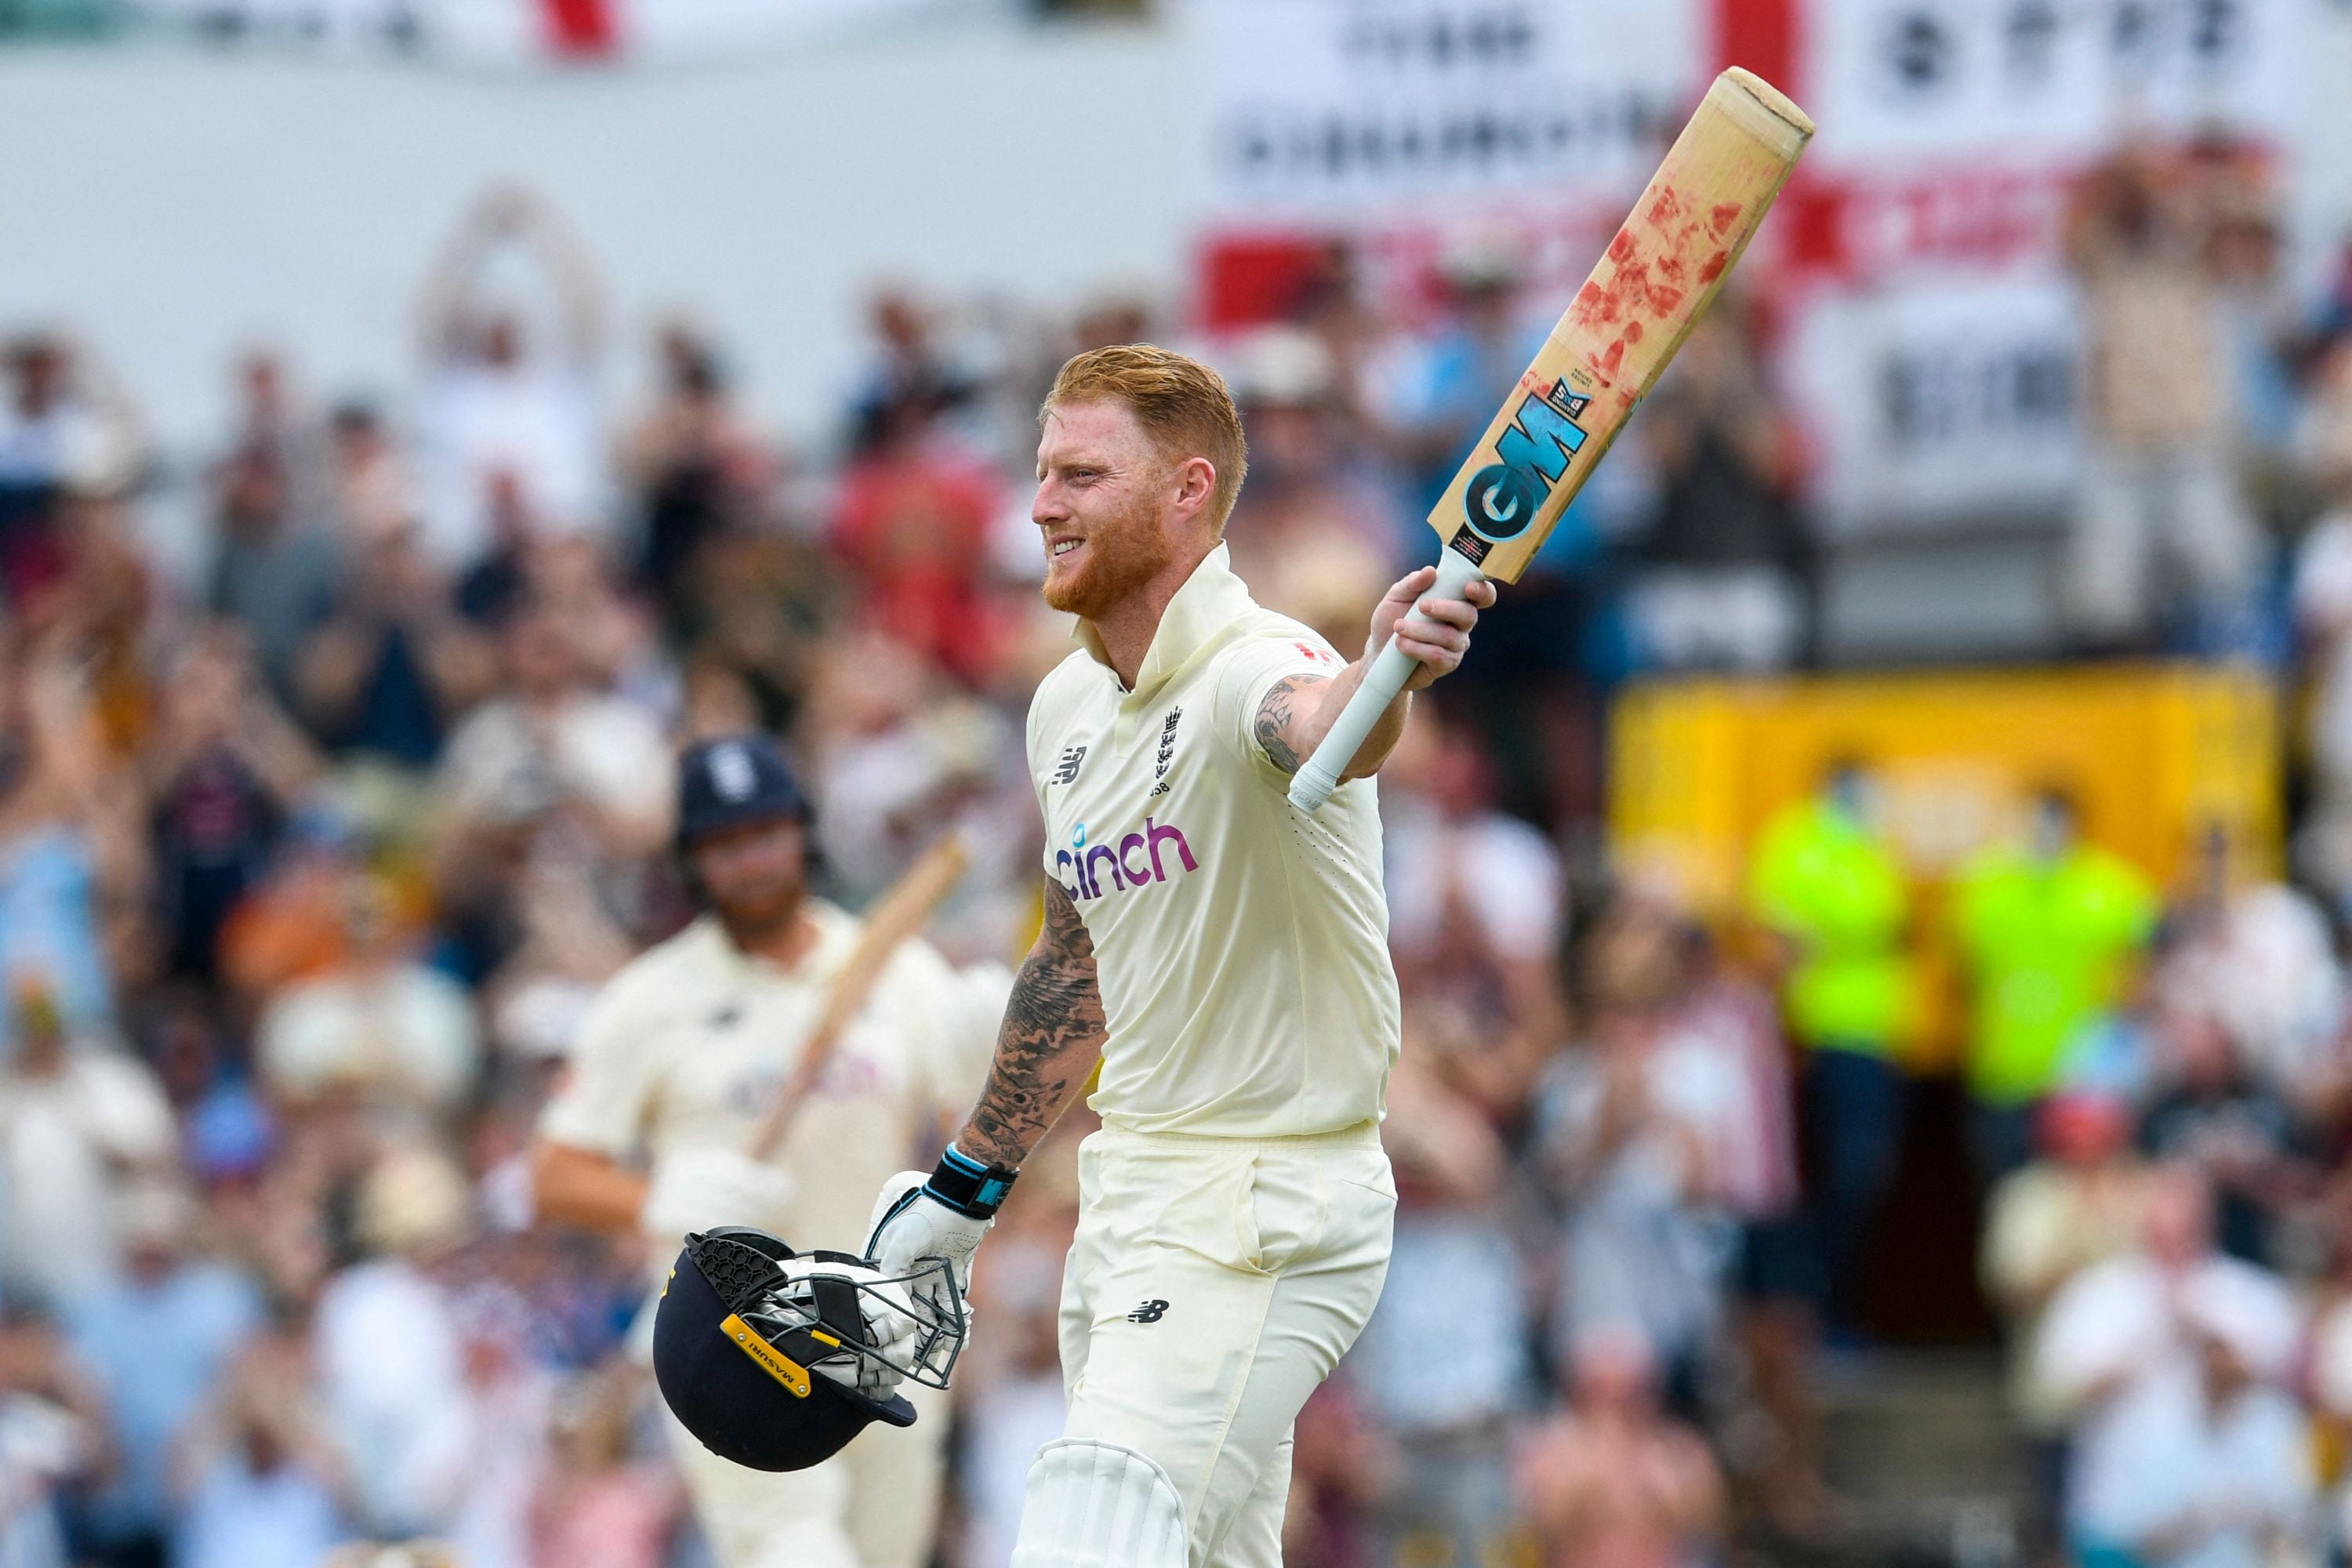 Ben Stokes celebrates his century during the 2nd day of the 2nd Test between West Indies and England